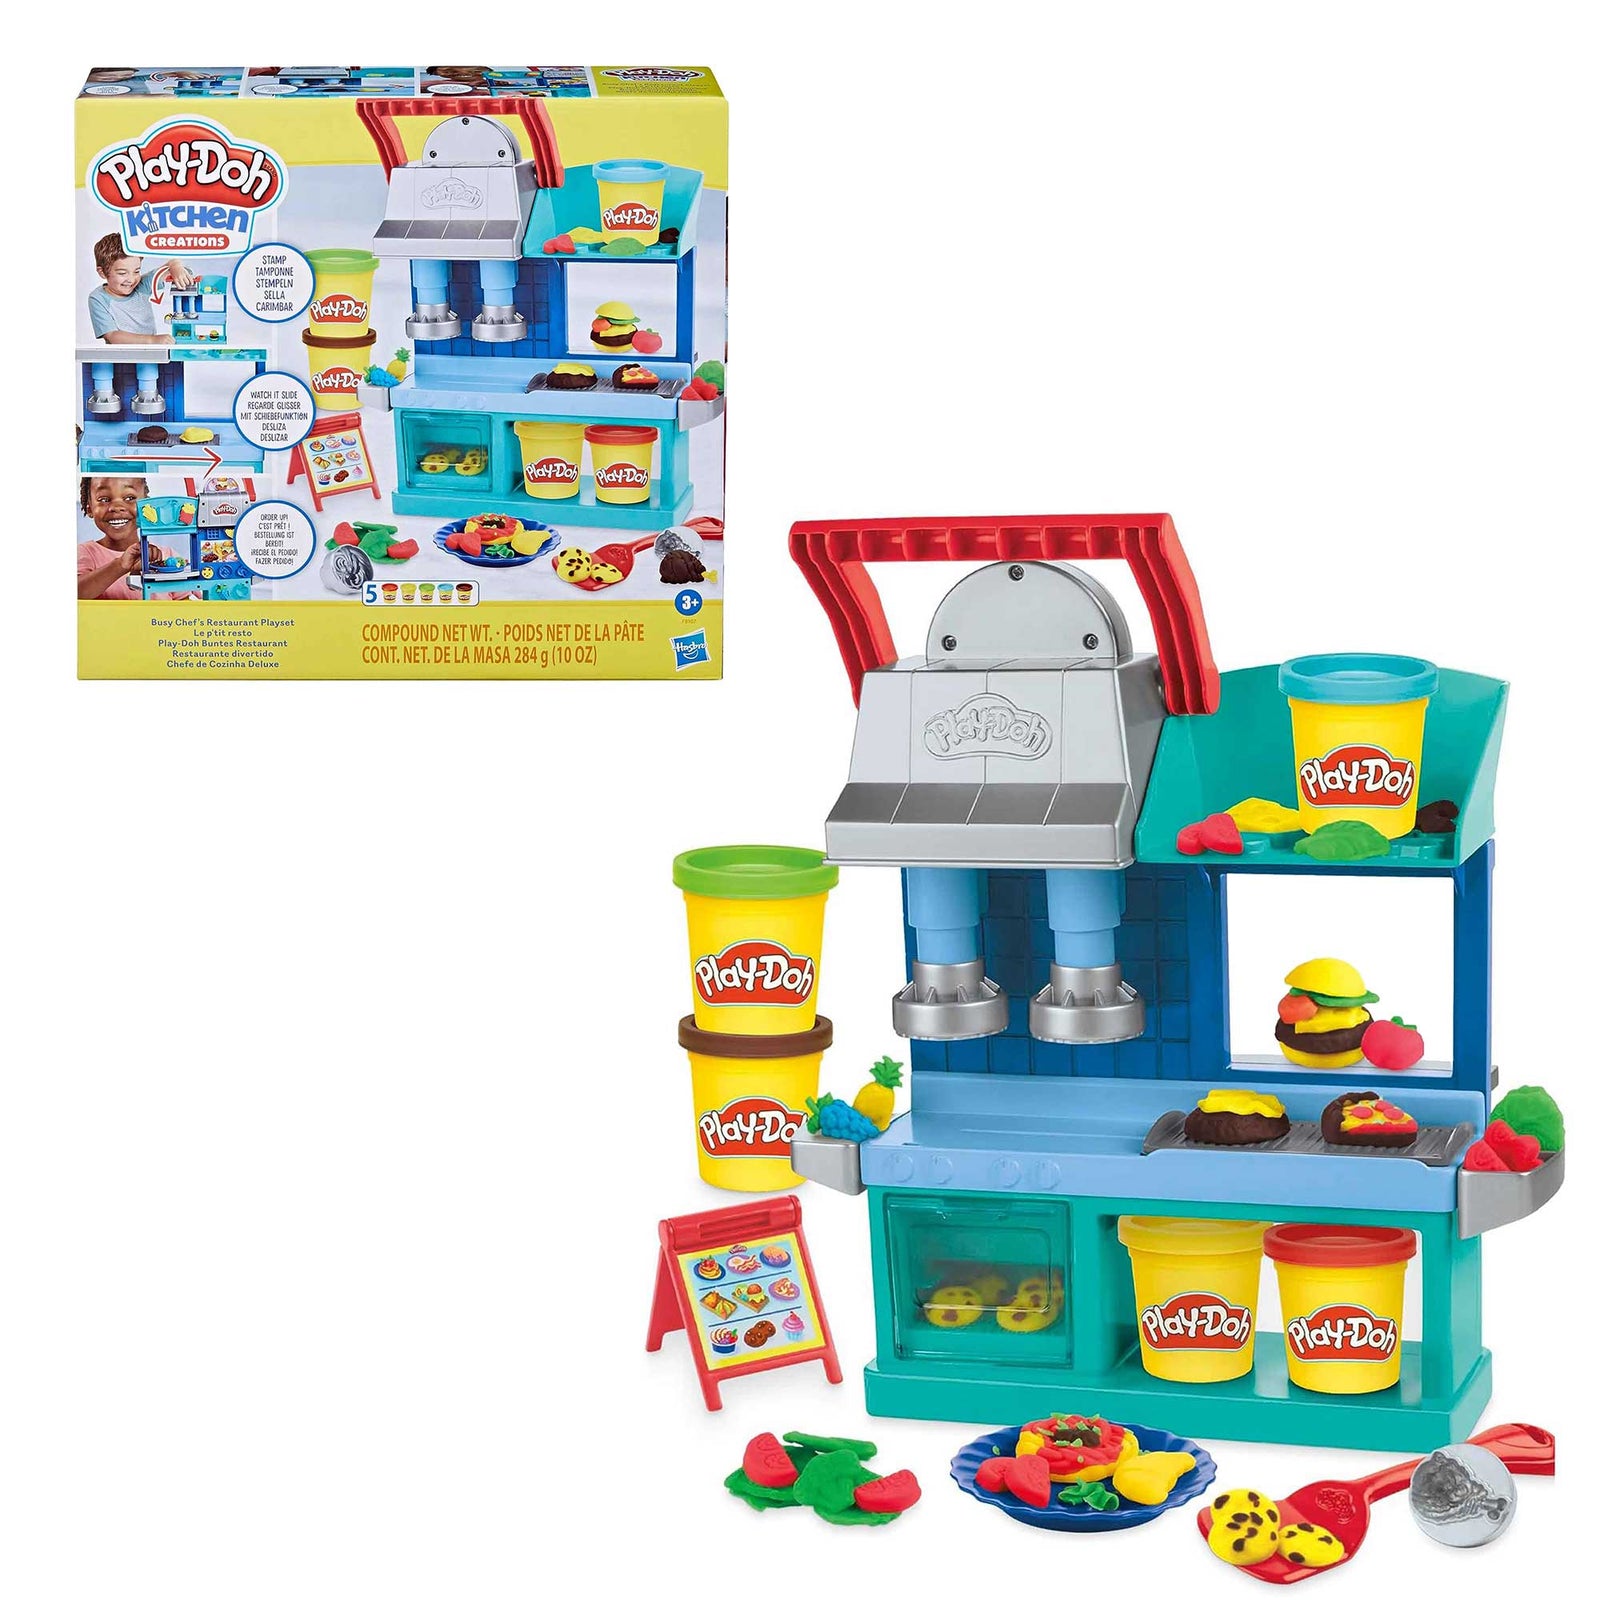  Play-Doh Kitchen Creations Pizza Oven Playset, Play Food Toy  for Kids 3 Years and Up, 6 Cans of Modeling Compound, 8 Accessories,  Non-Toxic : Toys & Games